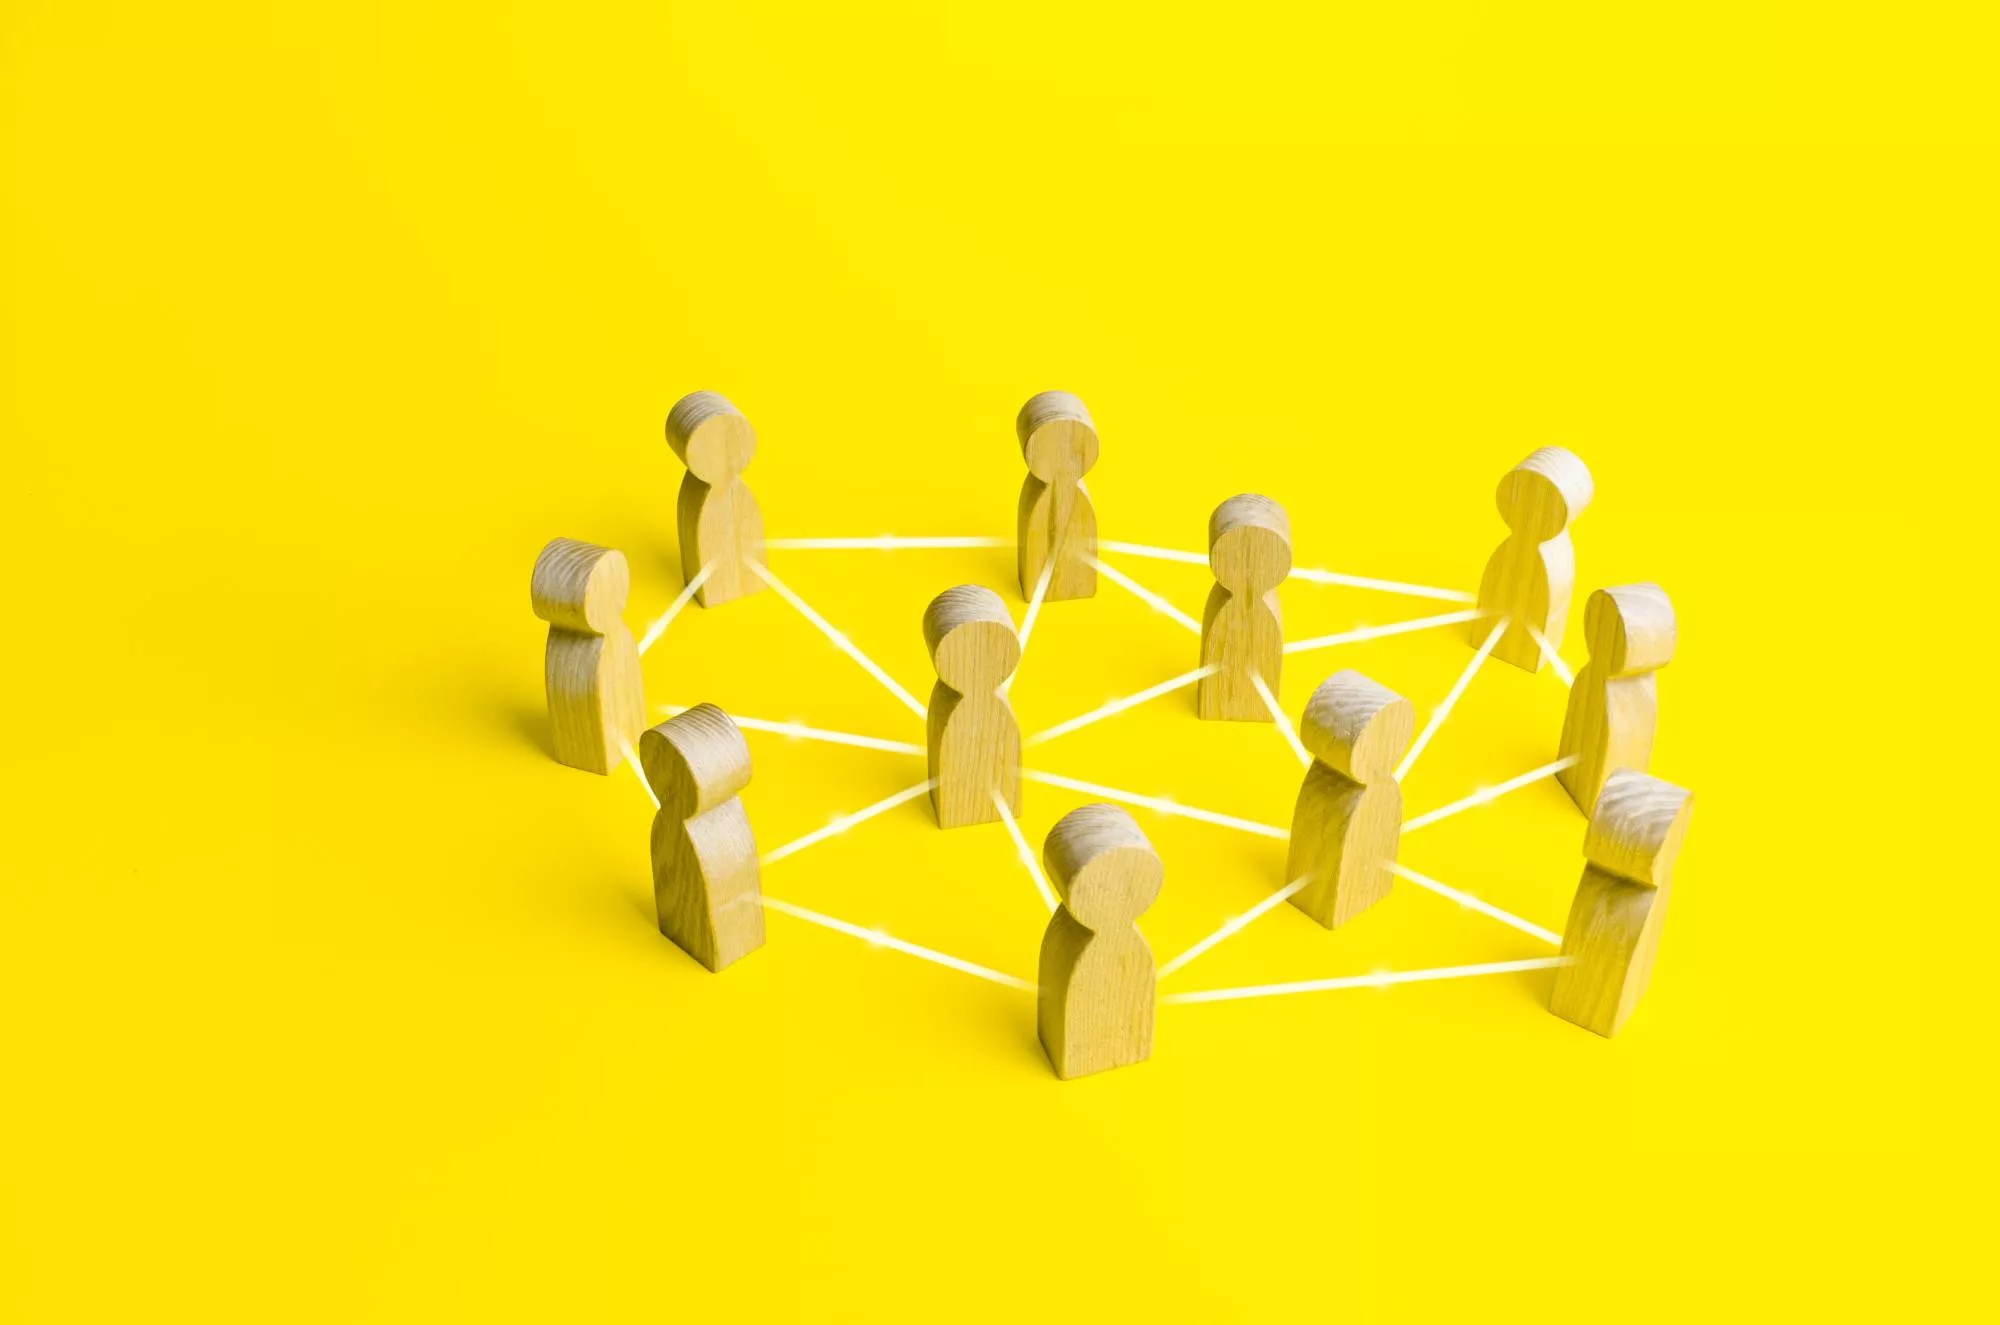 wooden people blocks on a yellow background with lines to connect them to represent a pllc